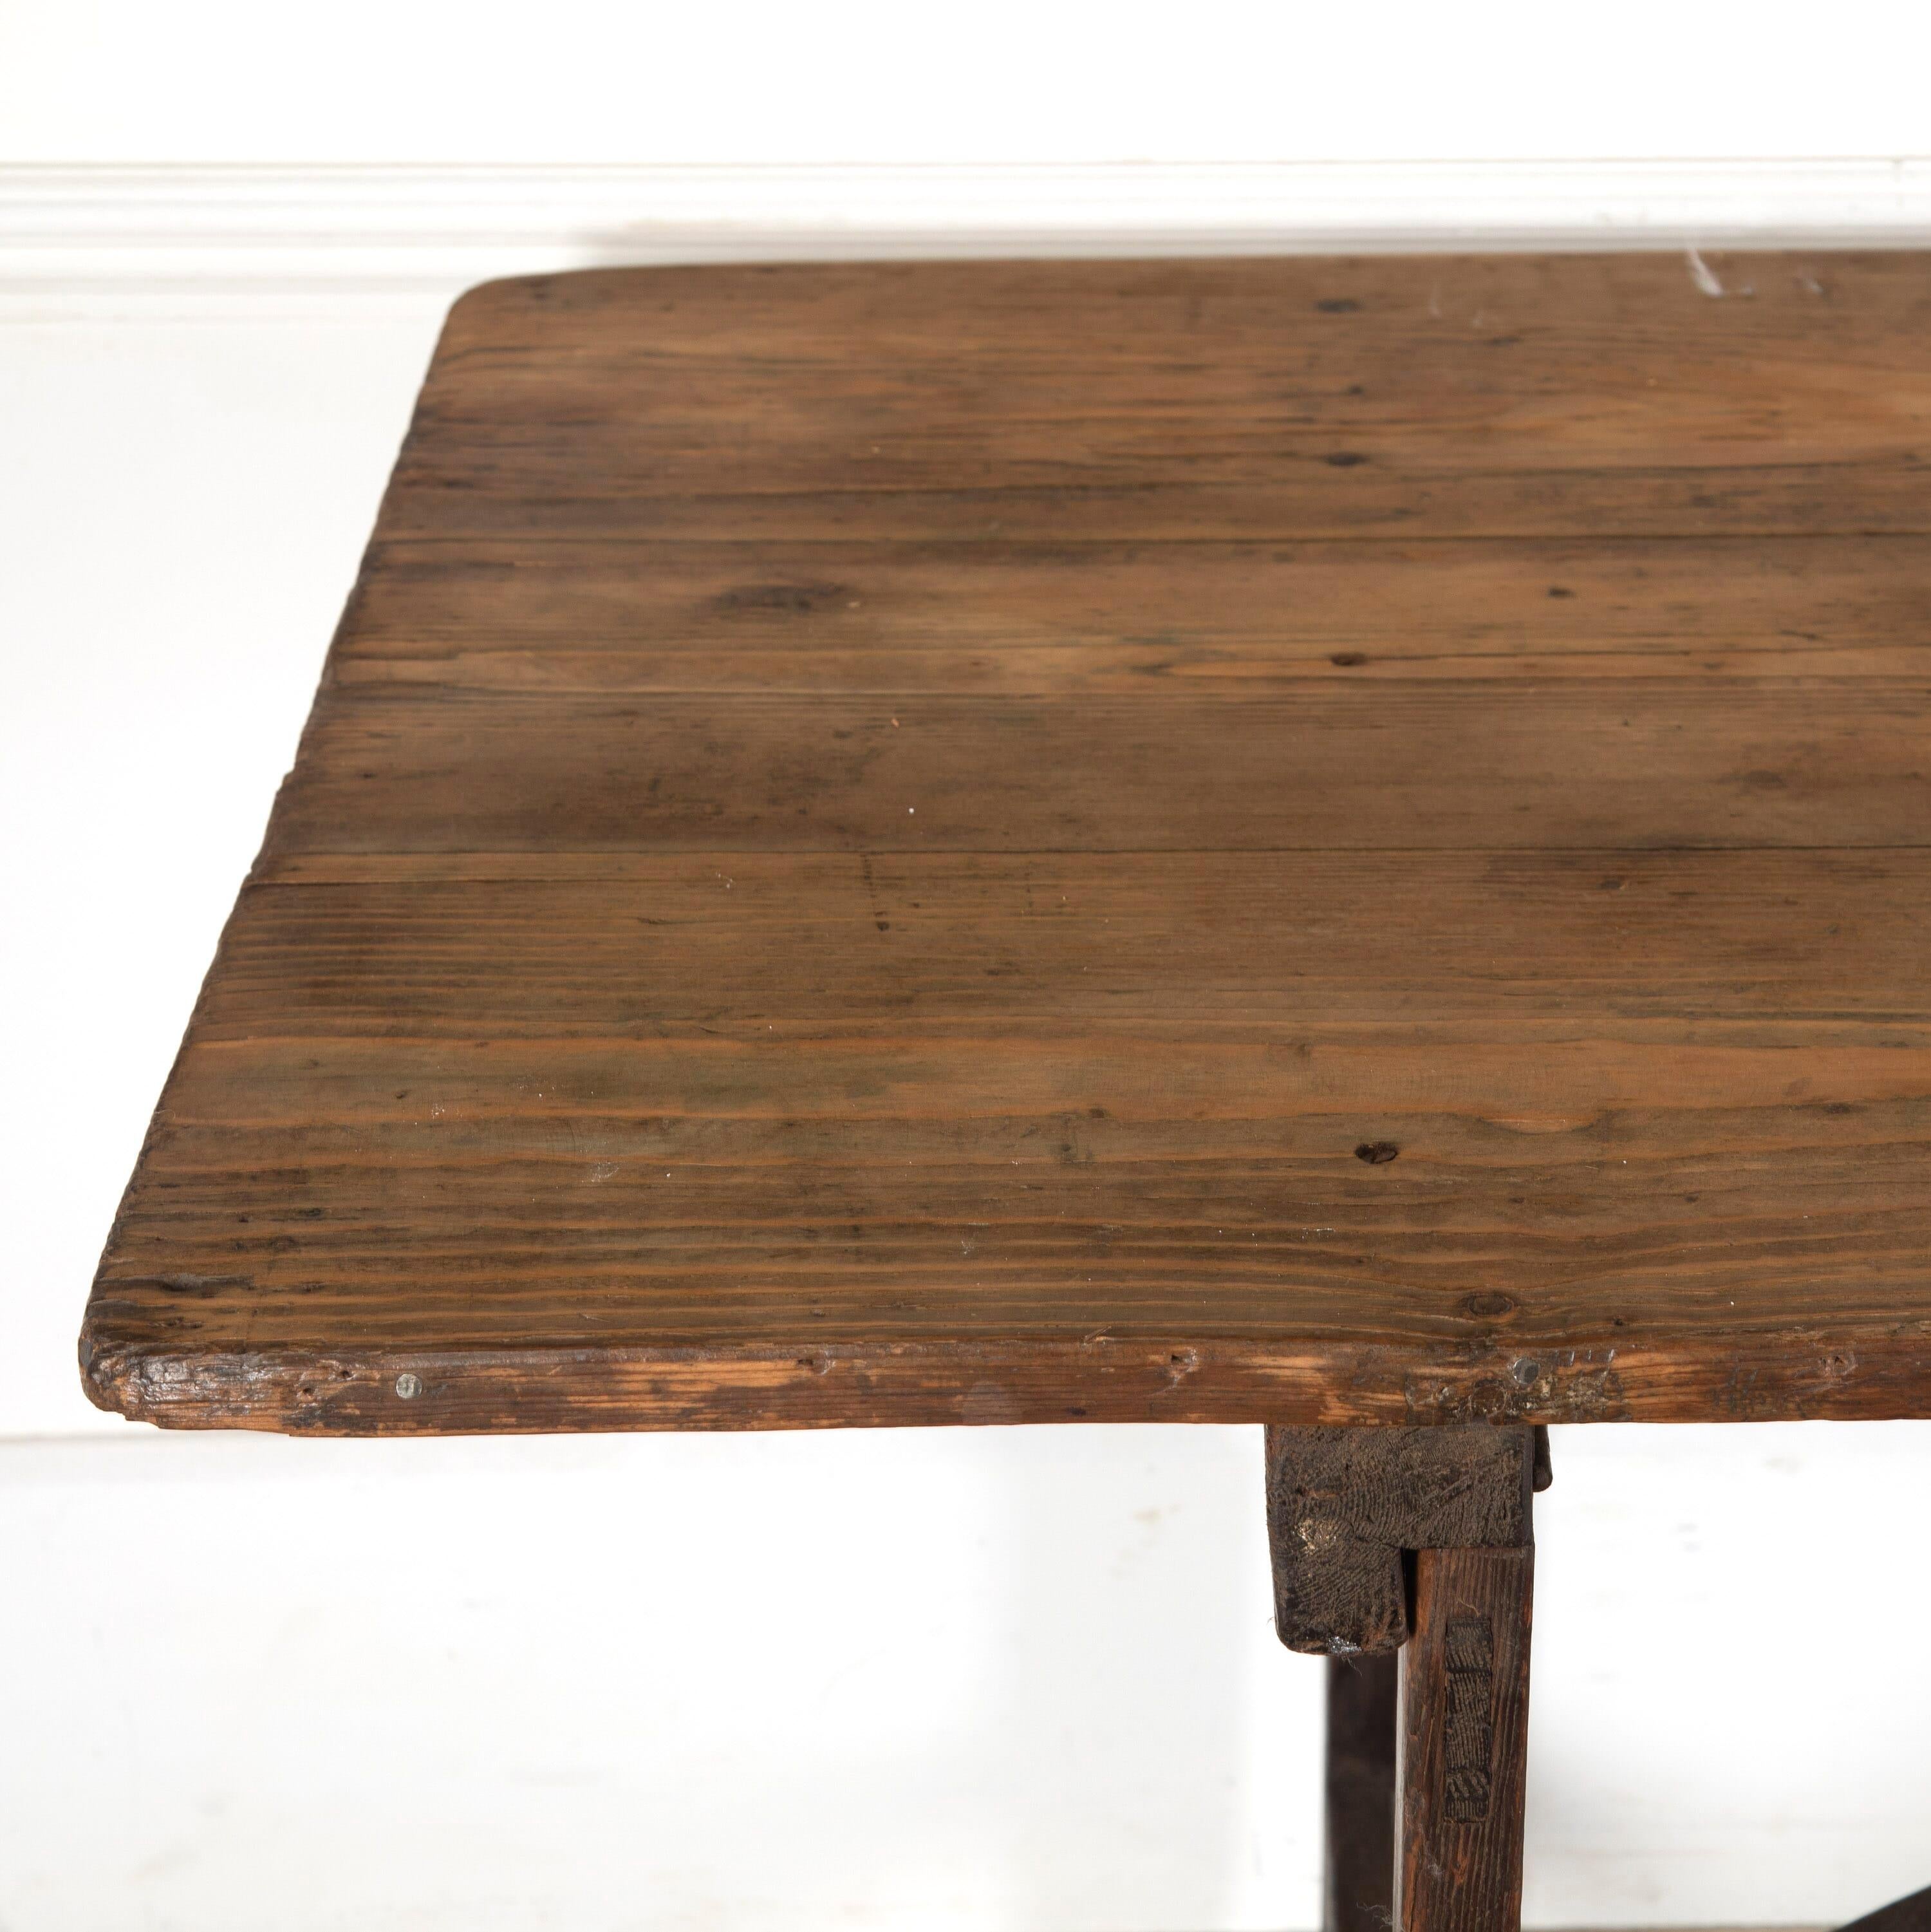 Large 19th century English pine trestle table.

This table features a boarded top with a gorgeous patina, trestle supports, and an attractive vaulted stretcher joining the two ends. 

Of good scale and sturdy, this would make a fantastic dining